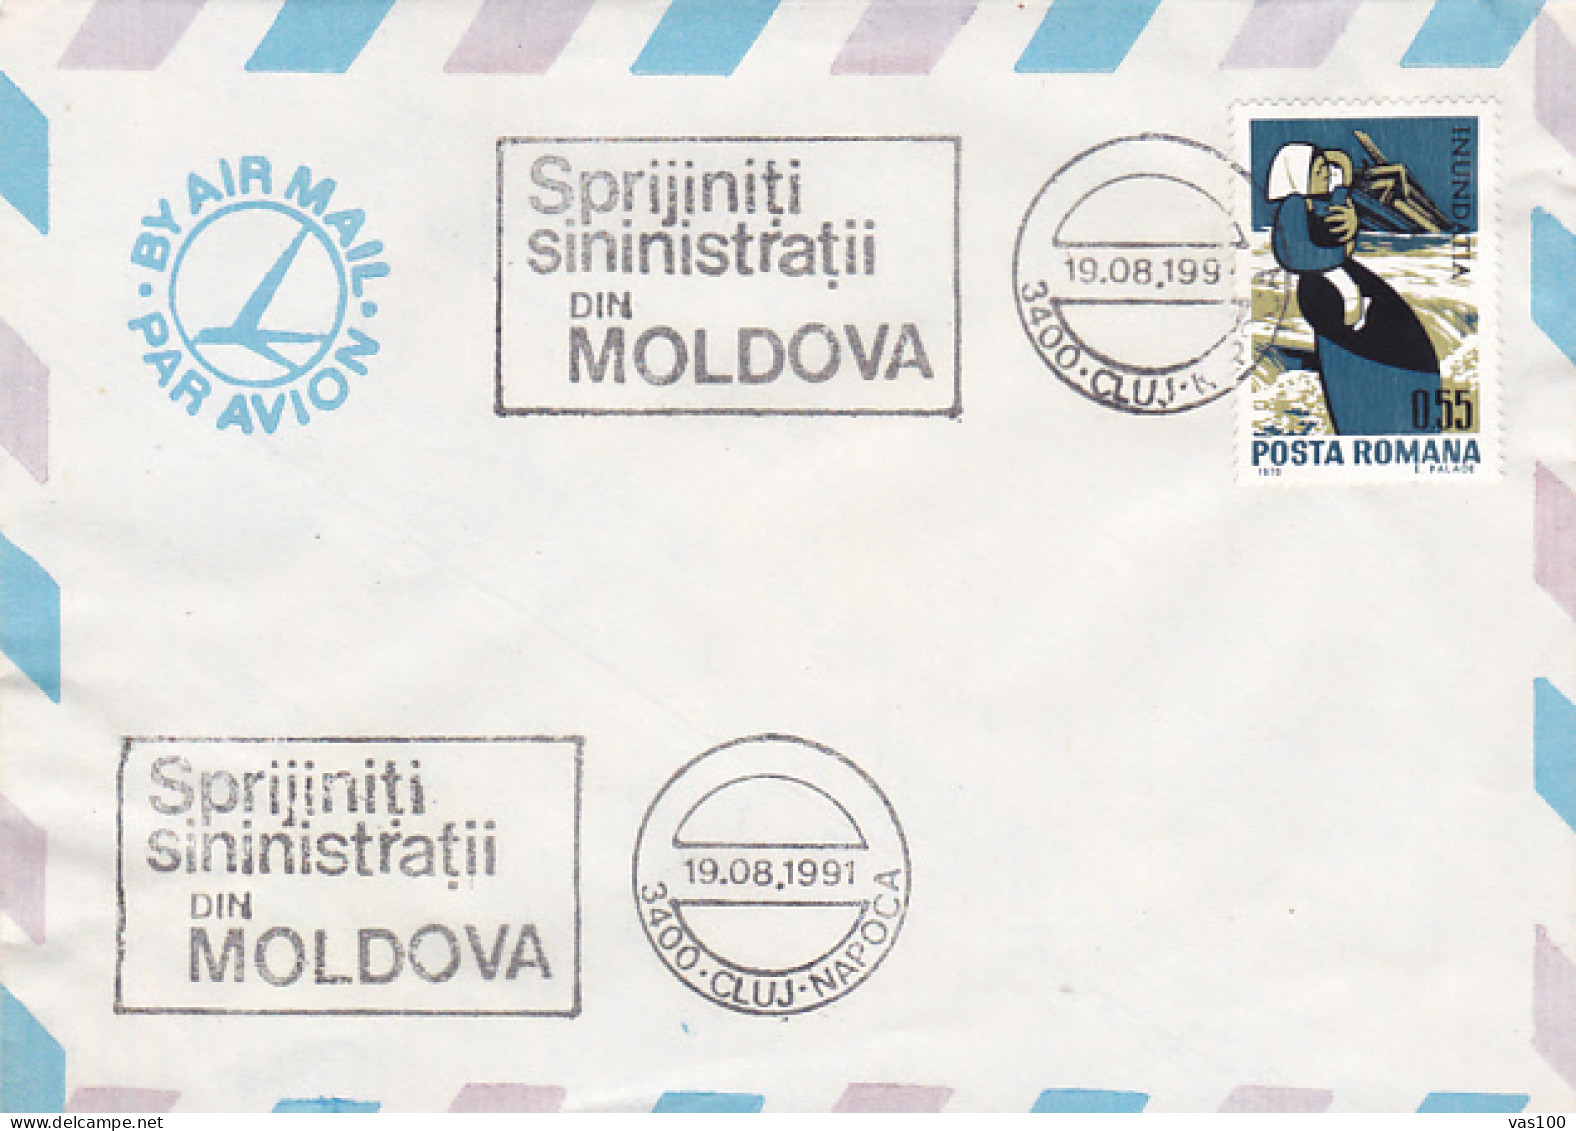 HELS FLOOD VICTIMS CAMPAIGN, SPECIAL POSTMARKS AND STAMP ON COVER, 1991, ROMANIA - Lettres & Documents